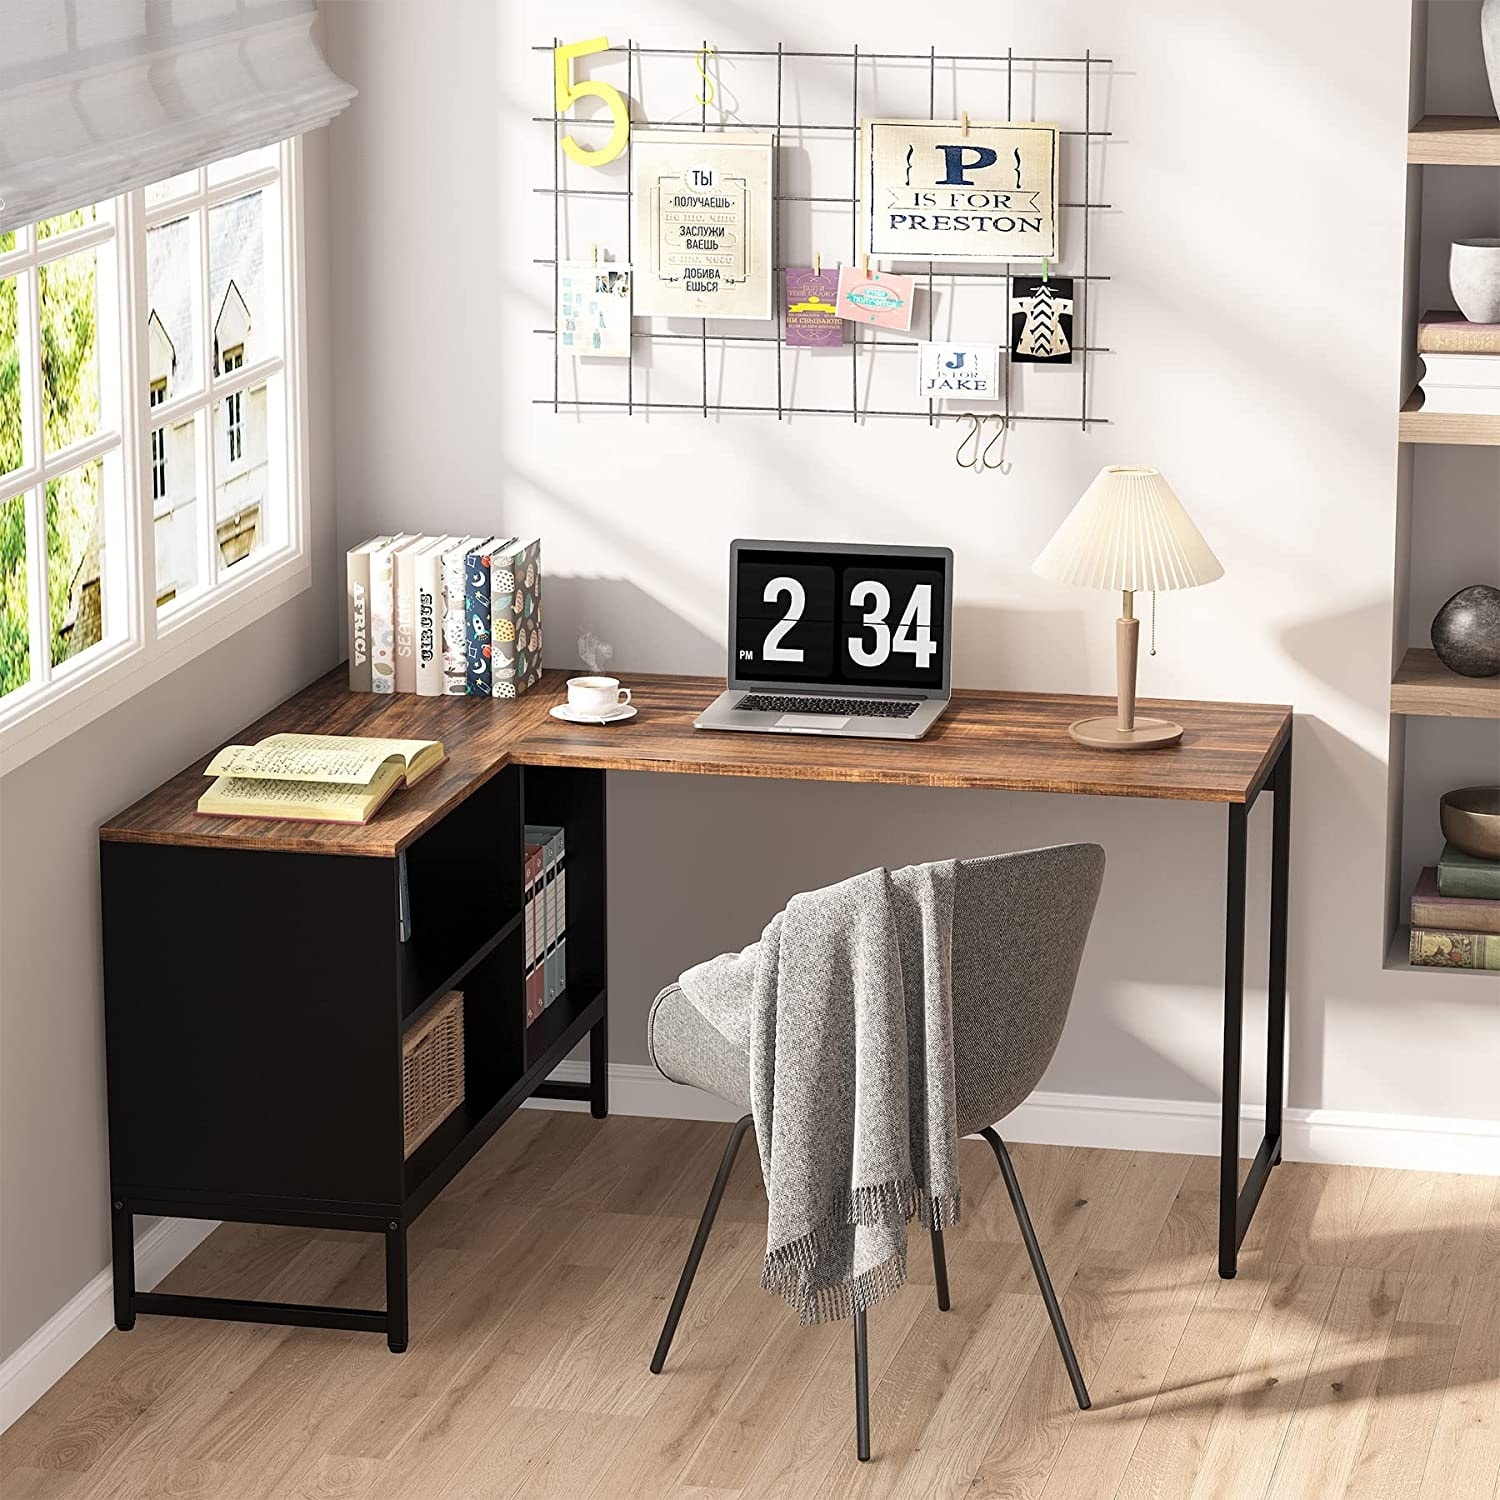 https://ak1.ostkcdn.com/images/products/is/images/direct/ddad8f9439a7def1cb5c4b83d968e1d3462316b5/60-Inch-Large-Corner-Desk%2CL-shaped-Desk-with-Storage-Cabinet%2CIndustrial-Wood-Home-Office-Desk.jpg